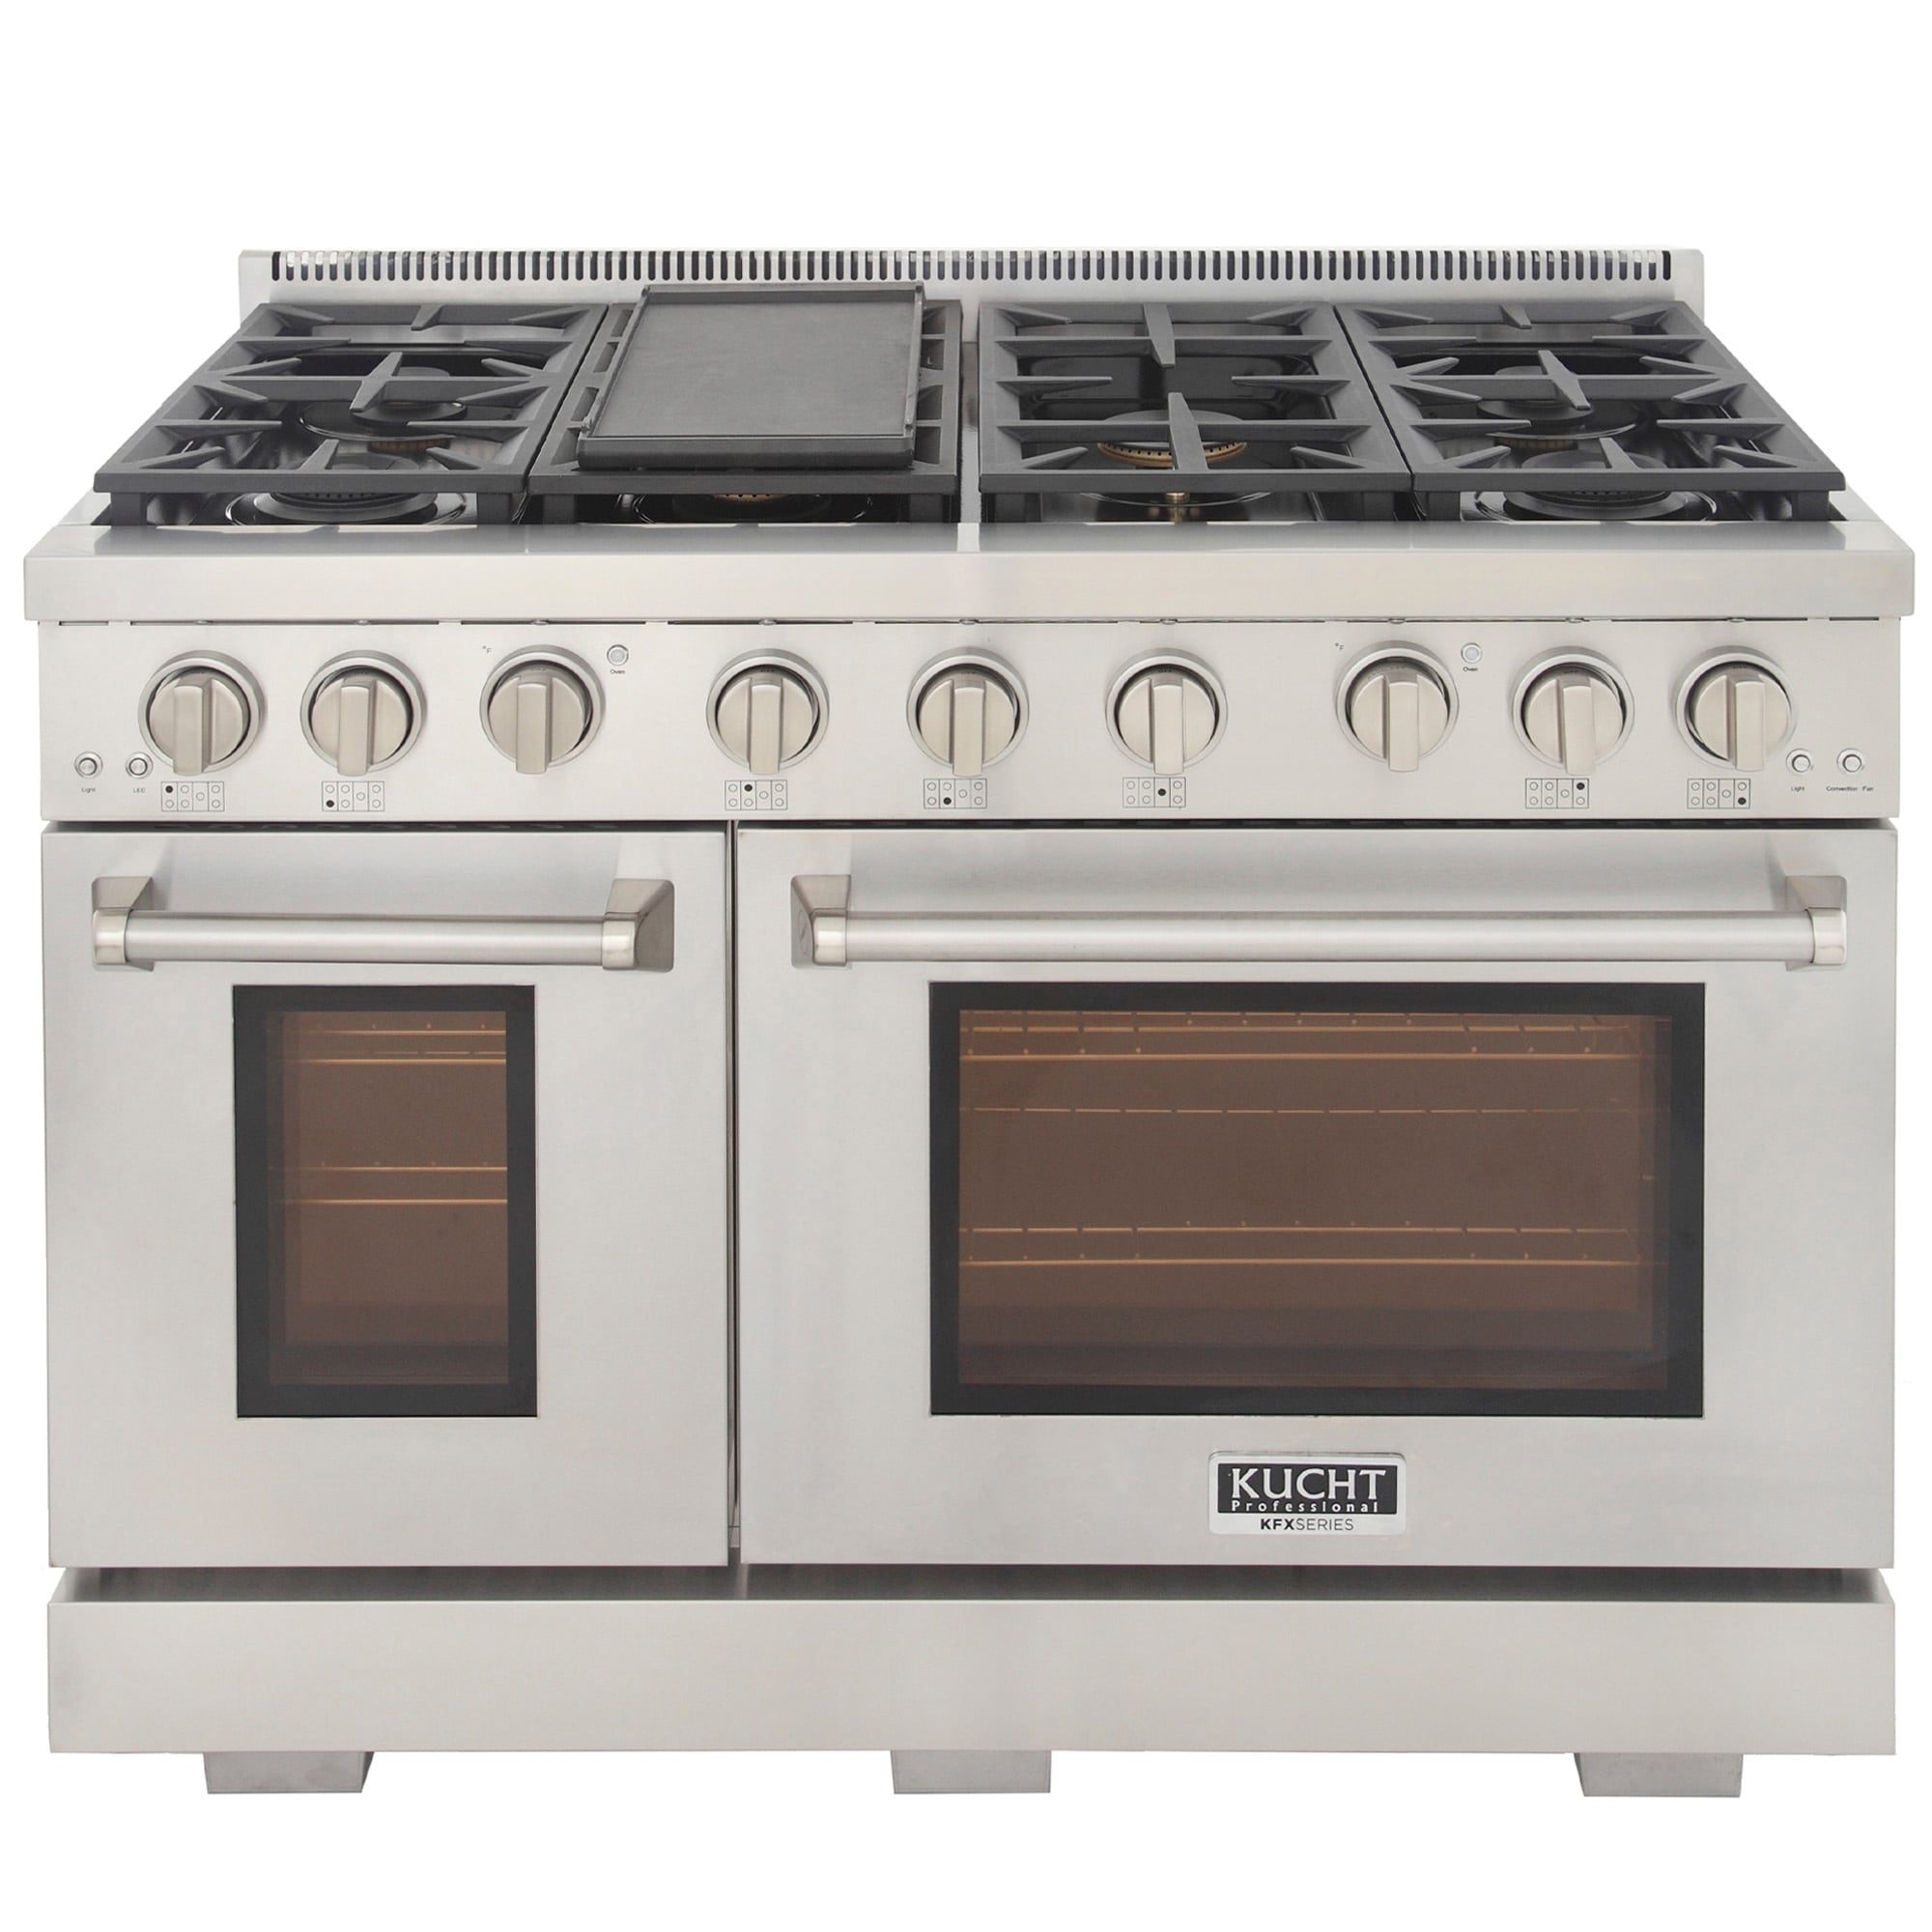 KUCHT Professional 48 in. 6.7 cu. ft. Double Oven Natural Gas Range with 25K Power Burner, Convection Oven in Stainless Steel